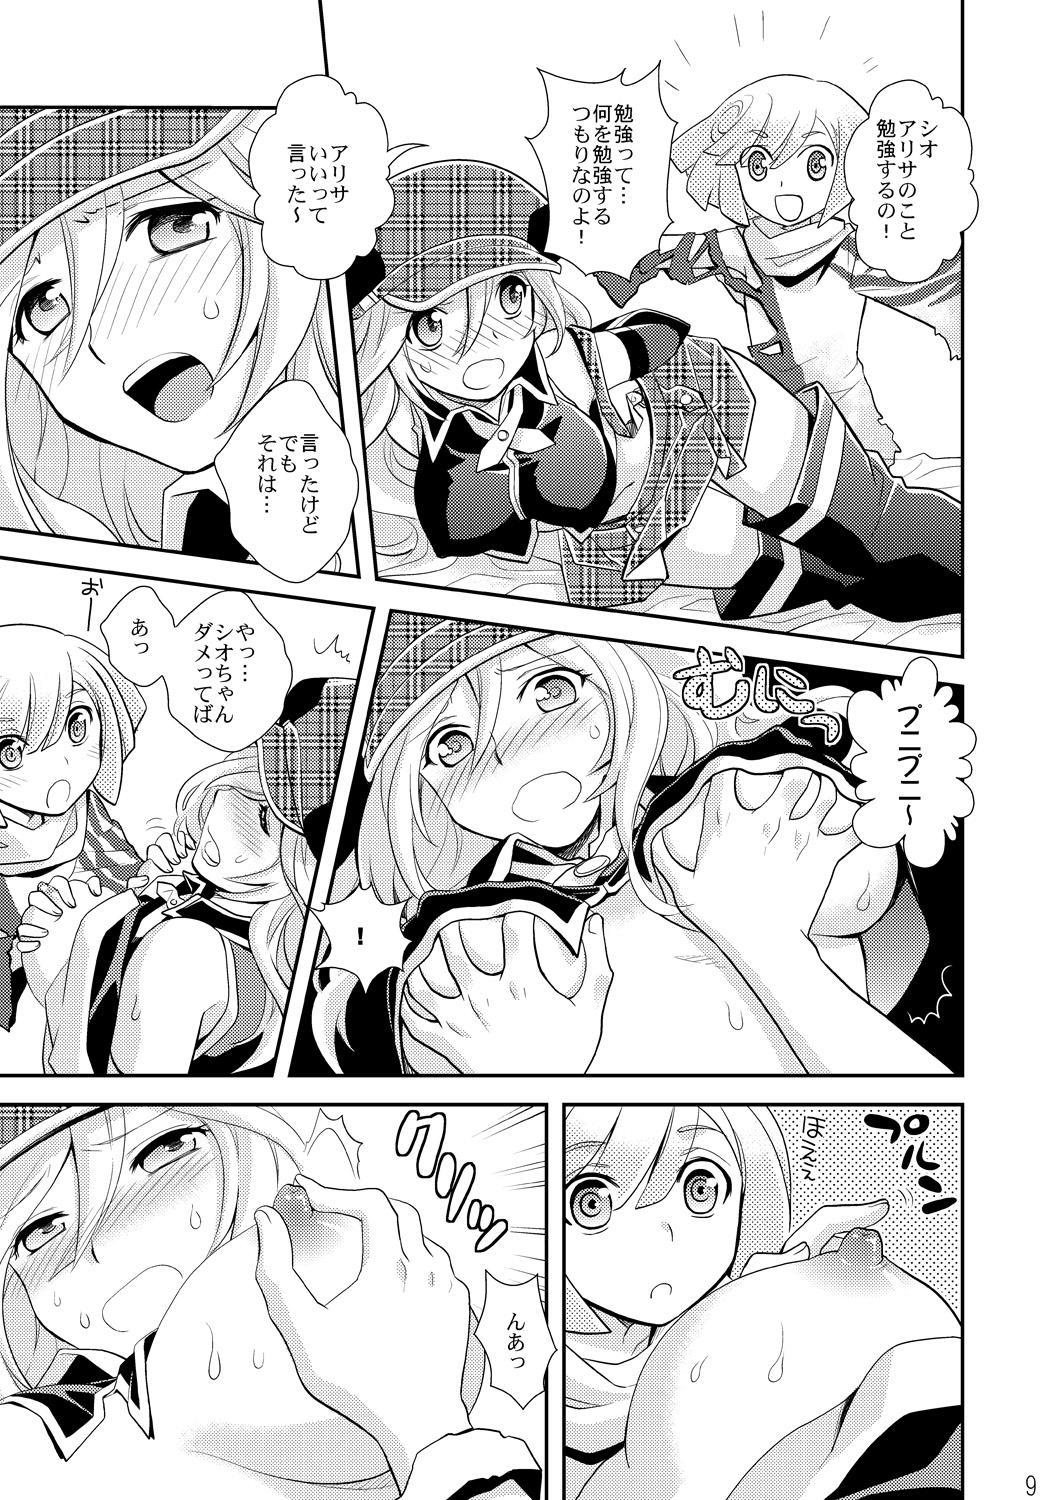 Delicia PUNIPUNI EATER - God eater Bigtits - Page 9